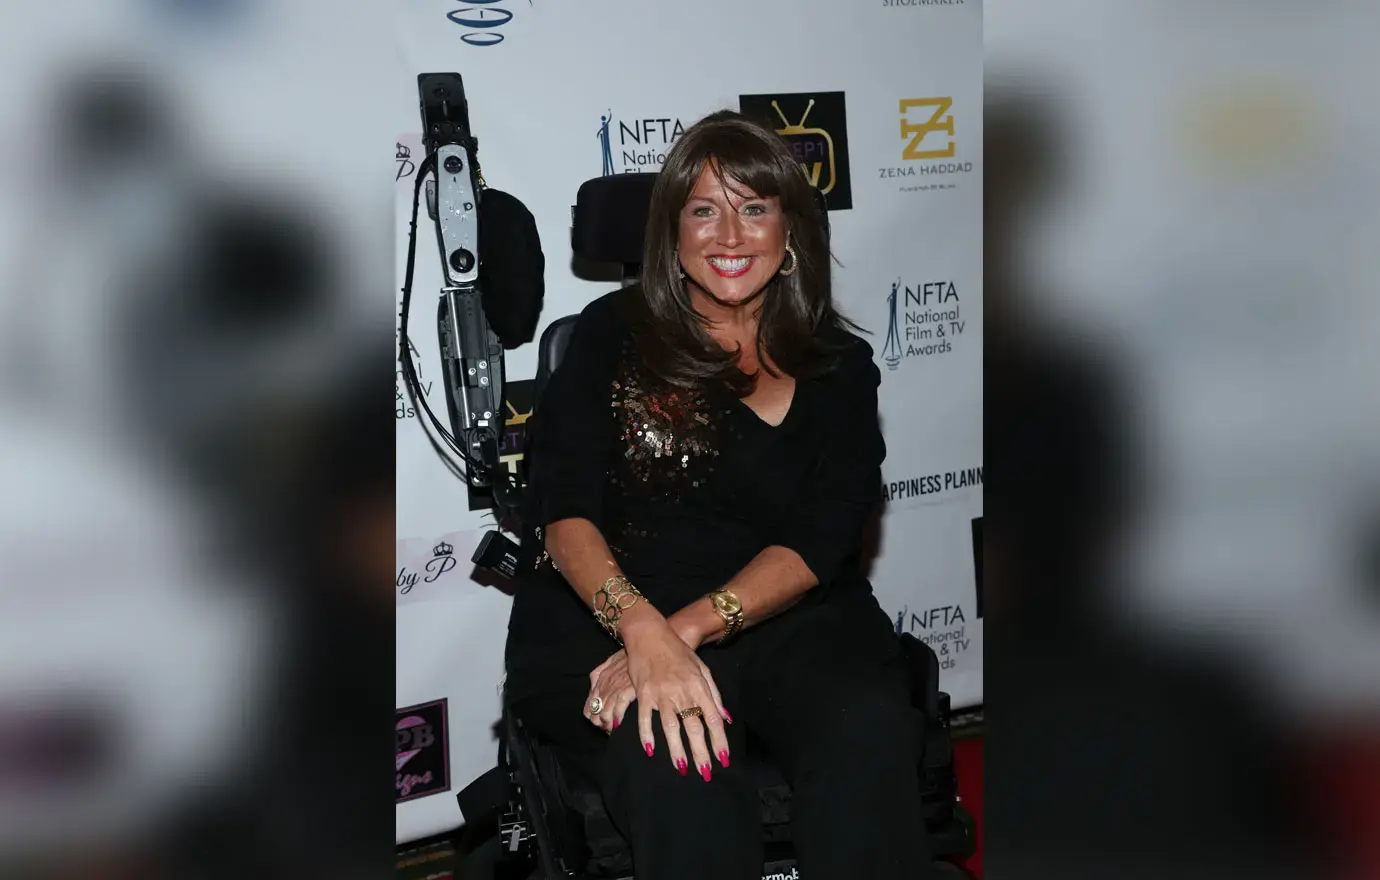 Abby Lee Miller - Birmingham tickets now available